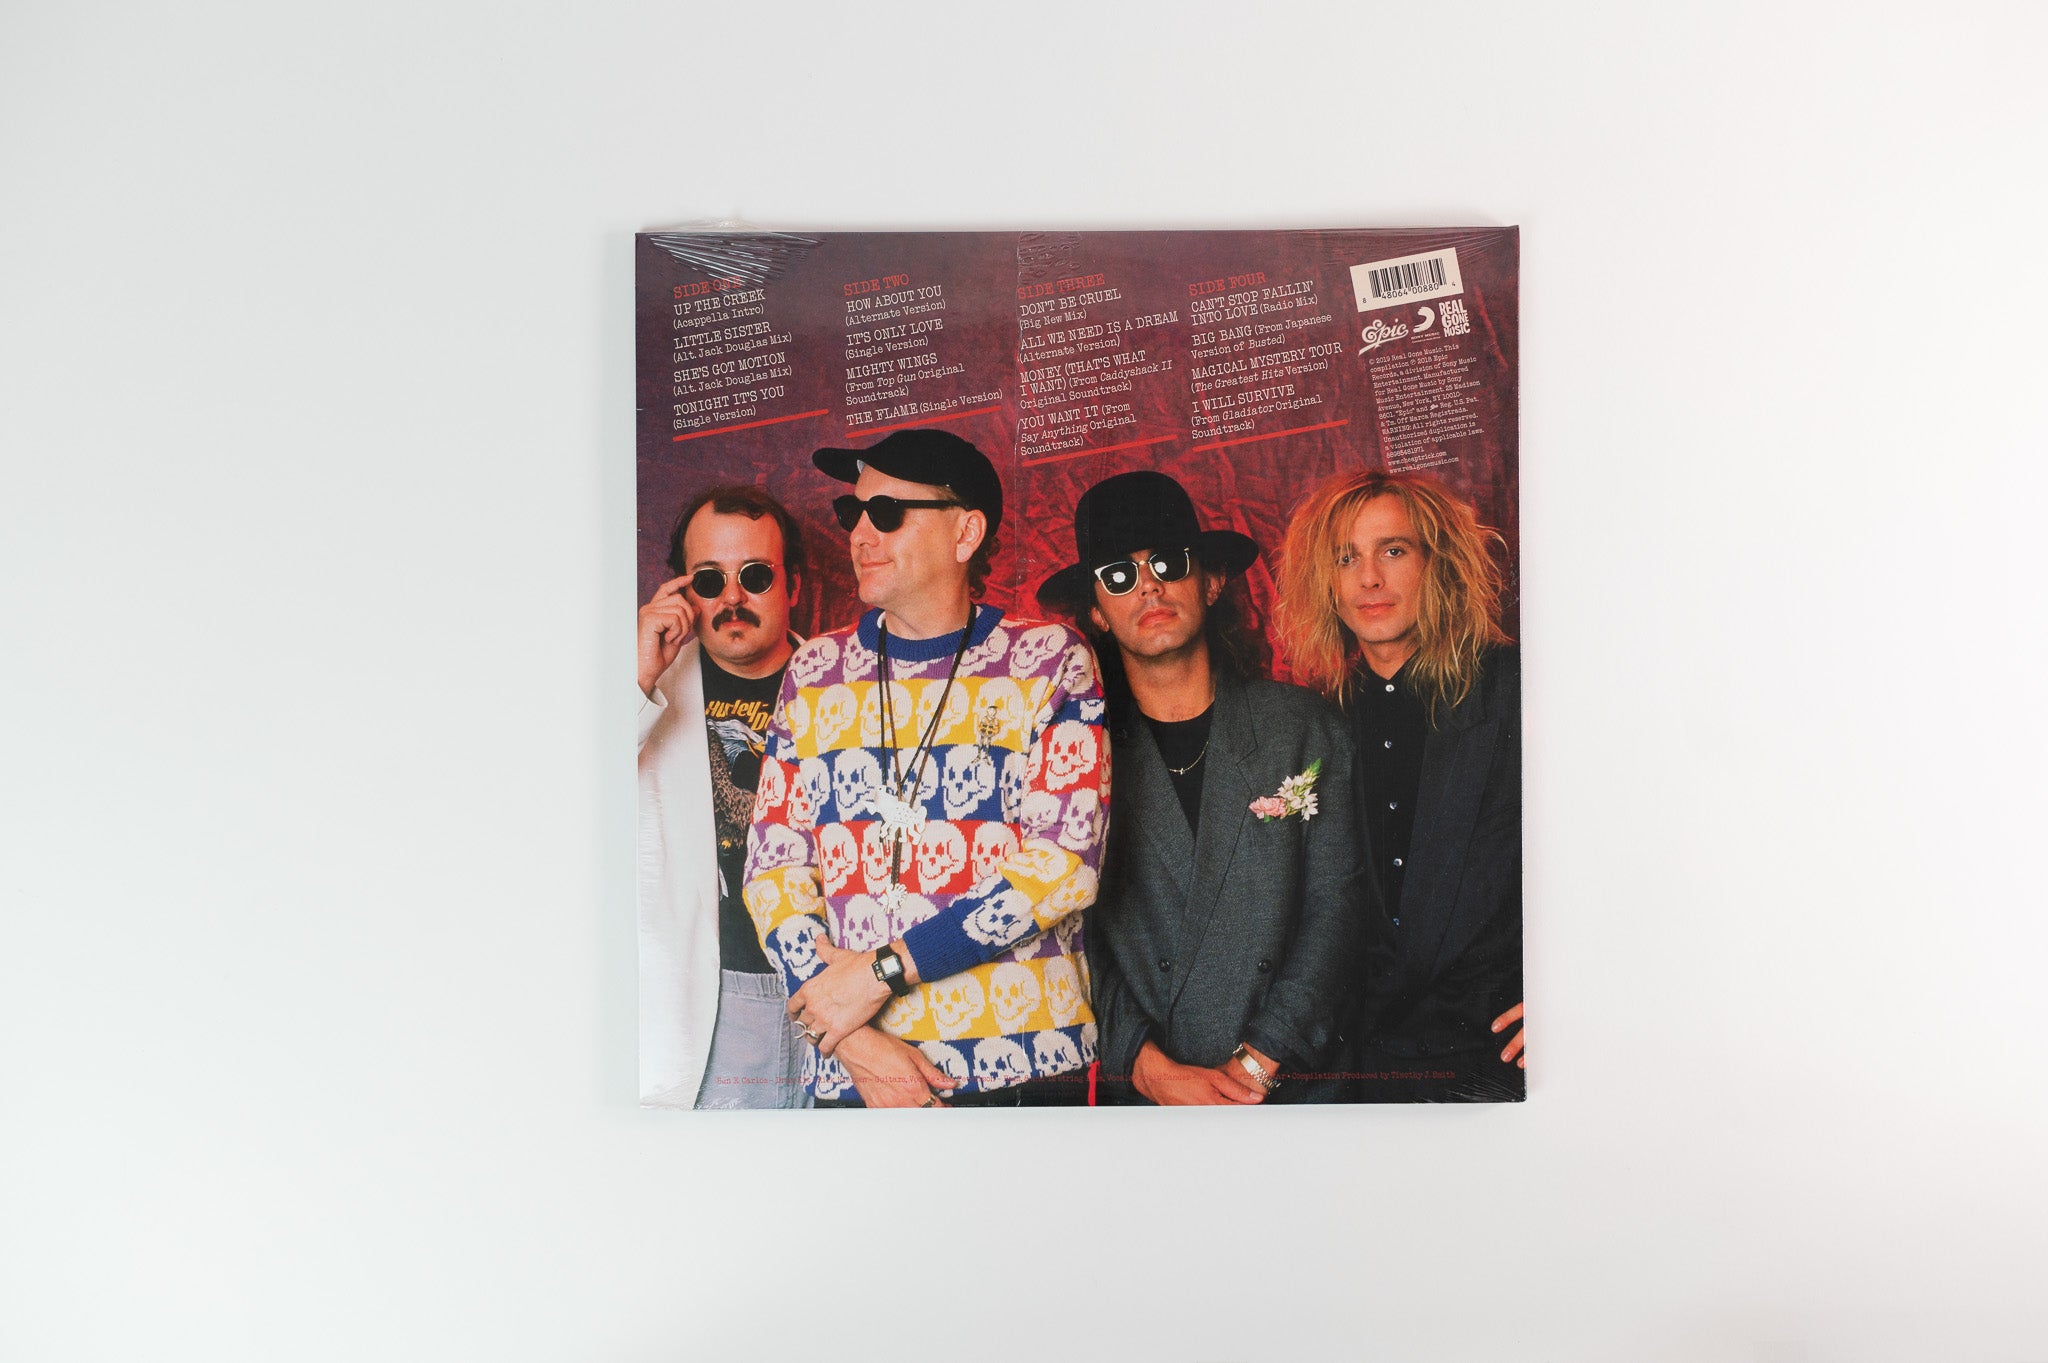 Cheap Trick - The Epic Archive Vol. 3 (1984-1992) on Real Gone / Epic - Sealed RSD Red Vinyl pressing